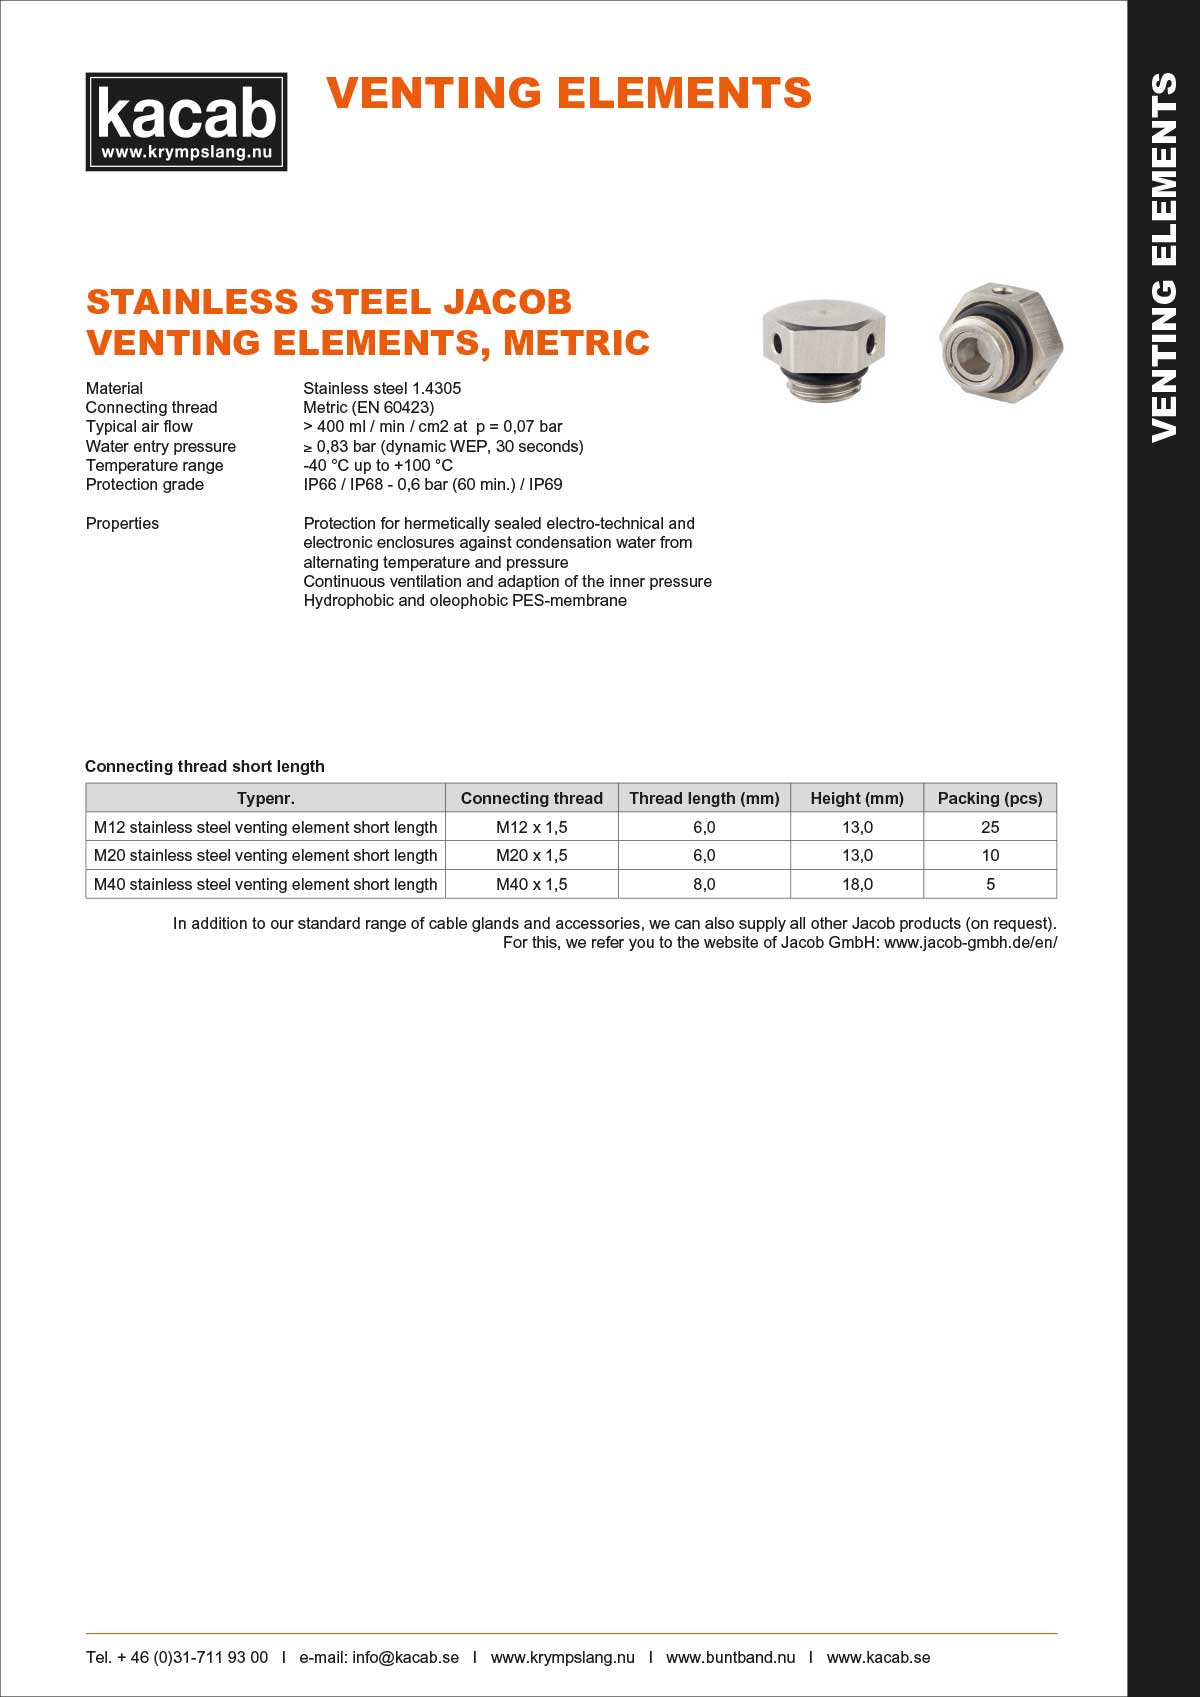 Stainless steel Jacob venting elements - Metric 